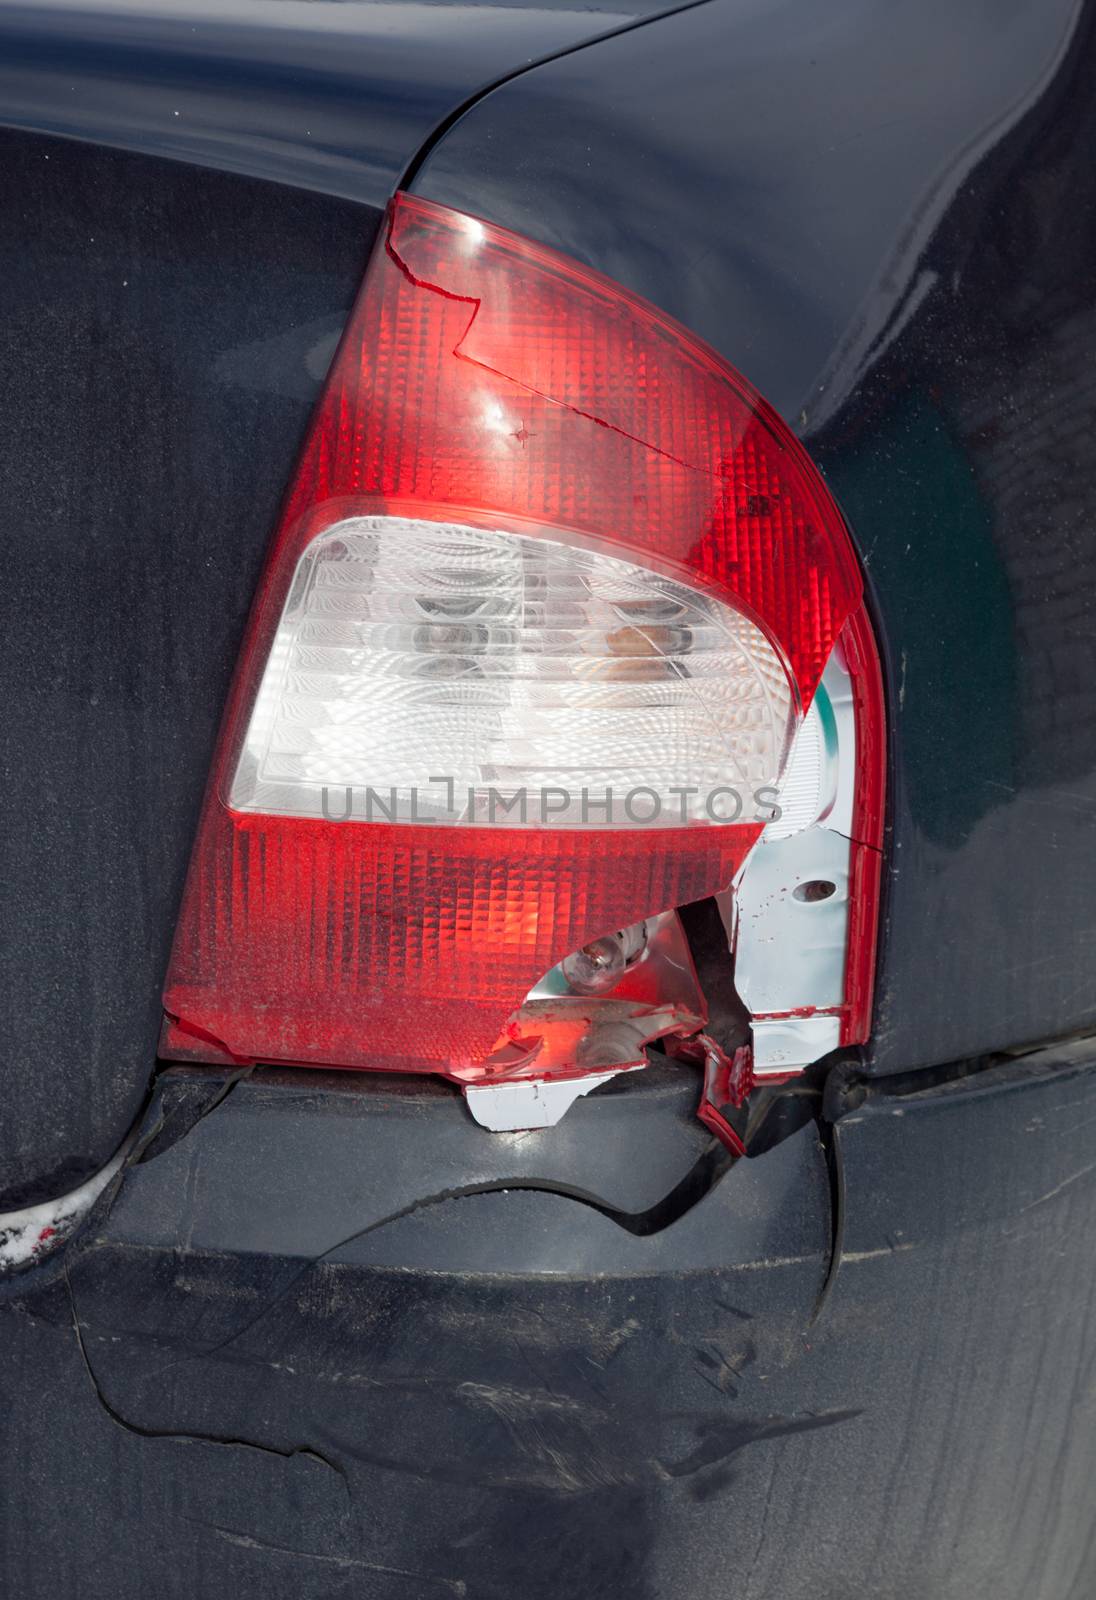 Damage bumper and headlights in the accident